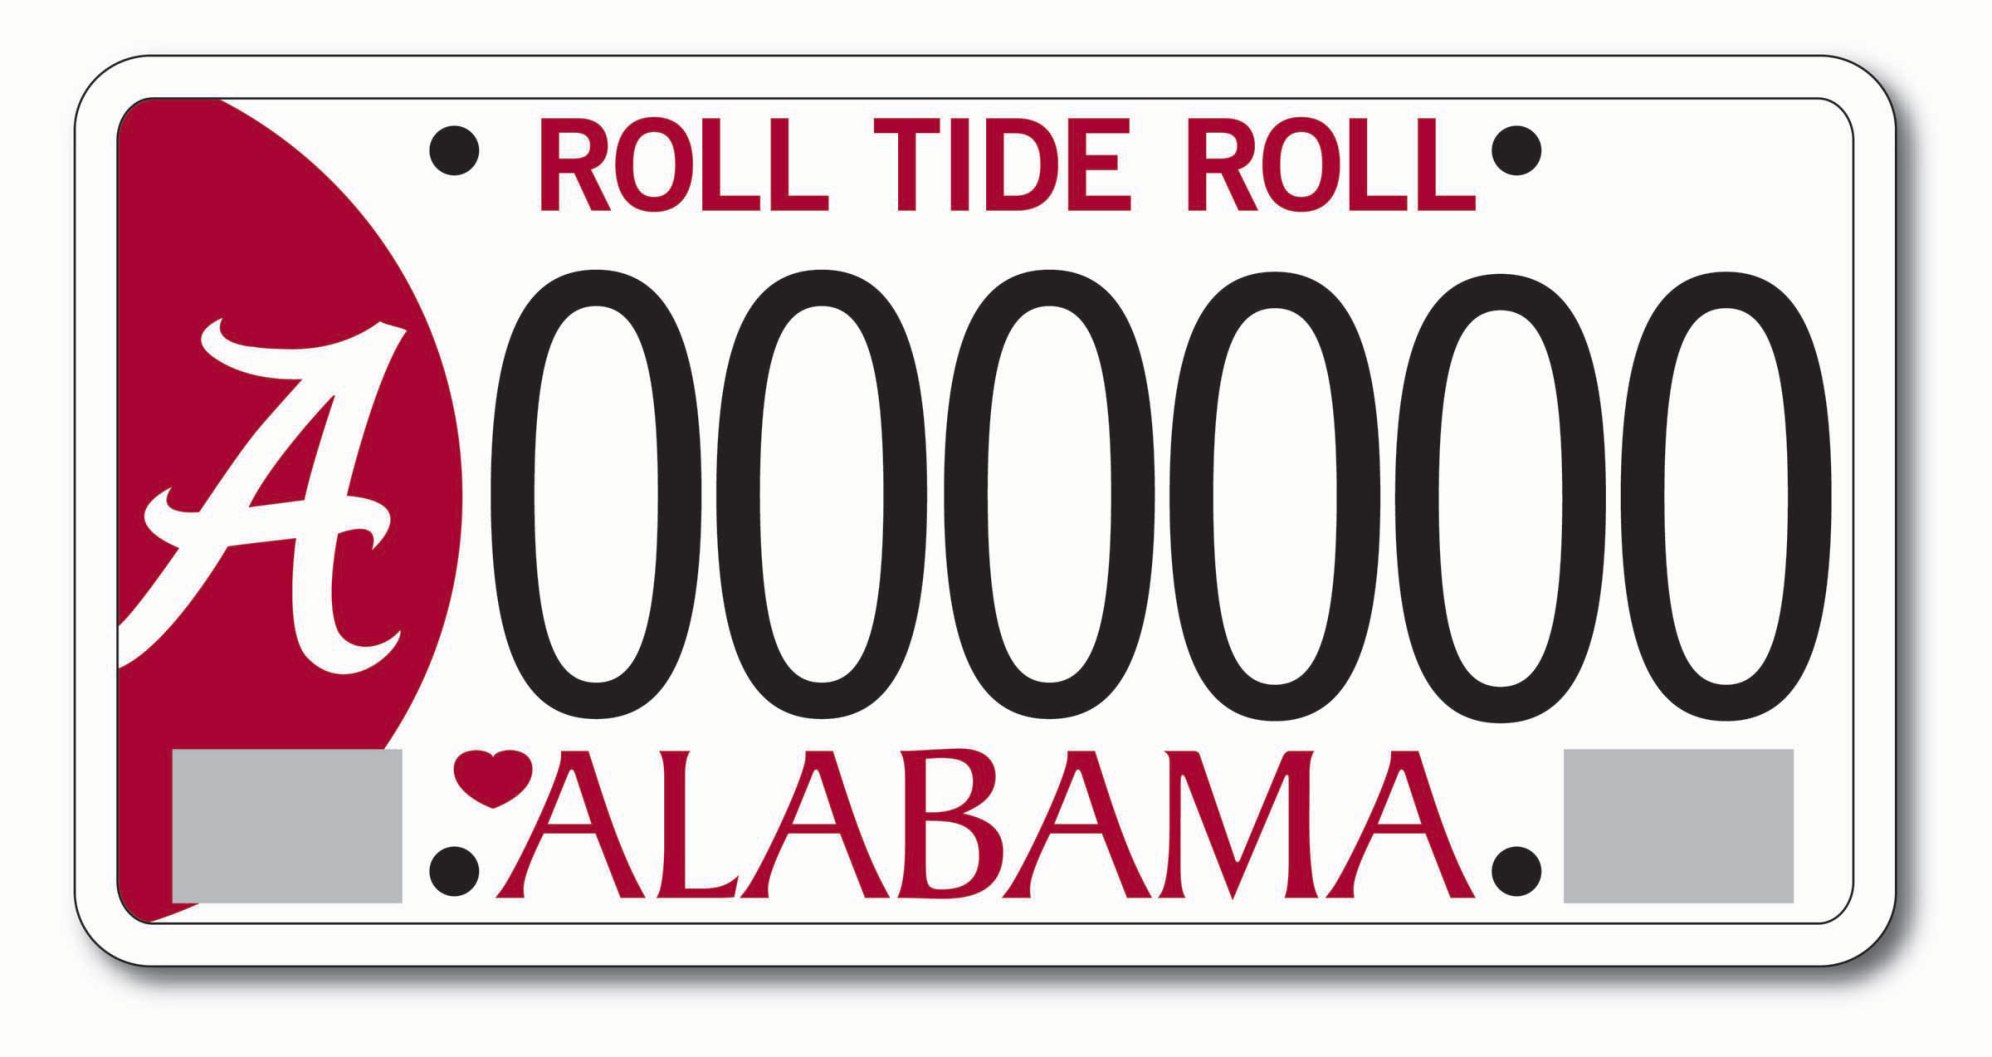 UA Car Tags Raise $3.8 Million to Support Student ...